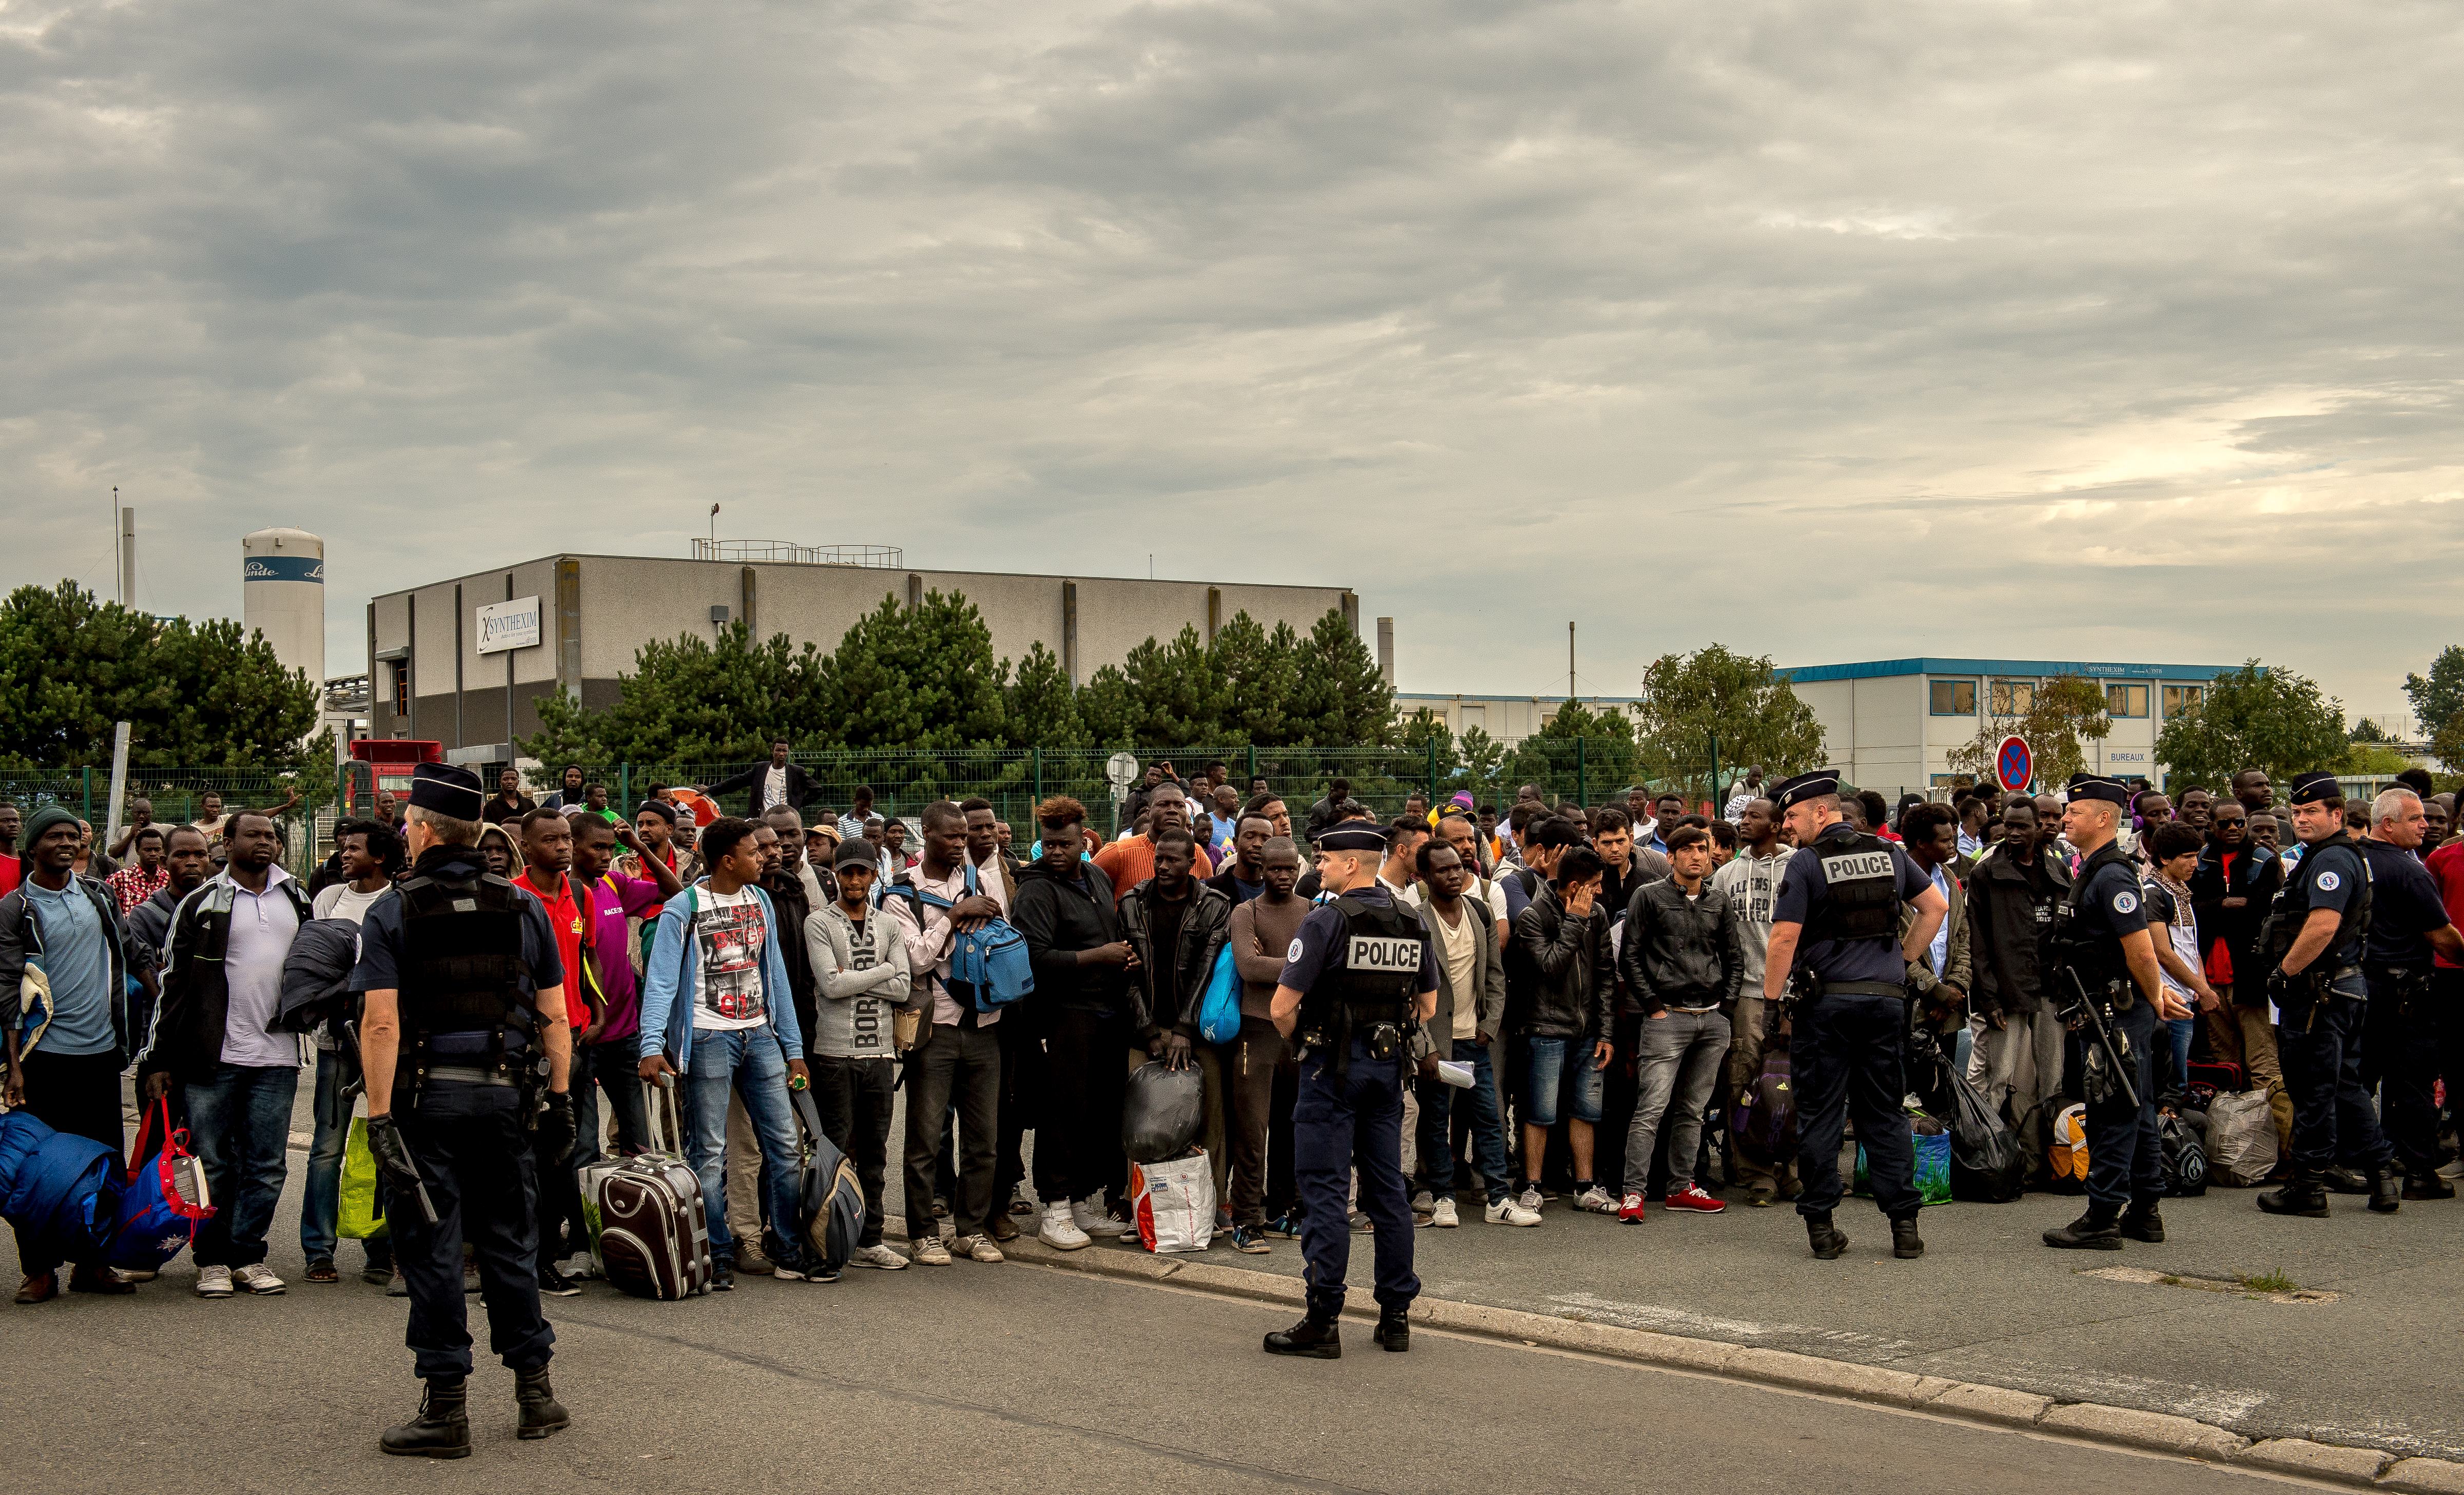 Migrants from the 'Jungle' migrant camp who have been denied access to a bus heading to a "Welcome and orientation centre" (CAO) are gathered under police surveillance, in Calais on Sept. 13, 2016.